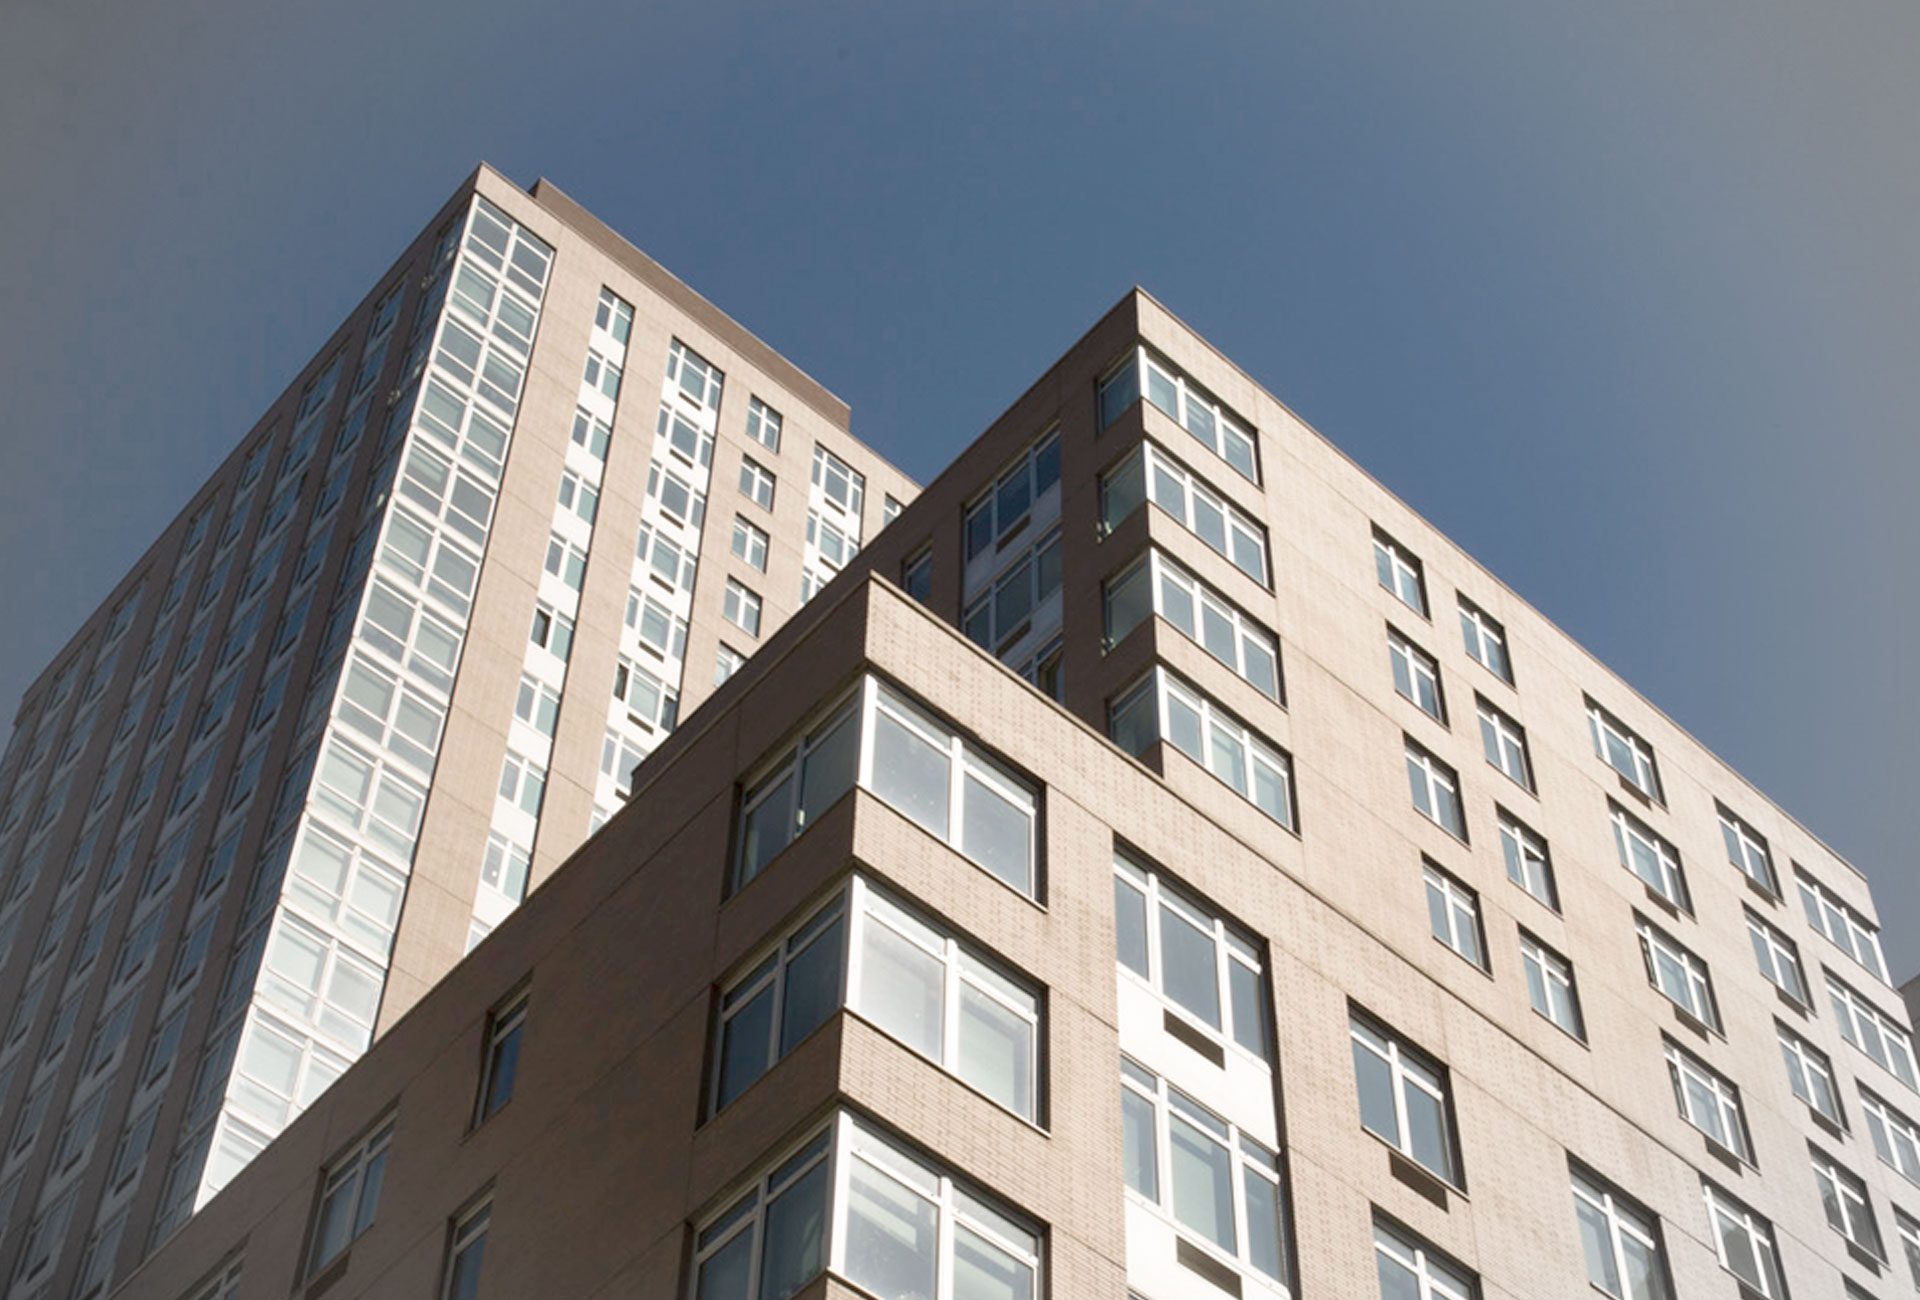 Sessanta: The Upper West Side’s One of a Kind Apartment Building